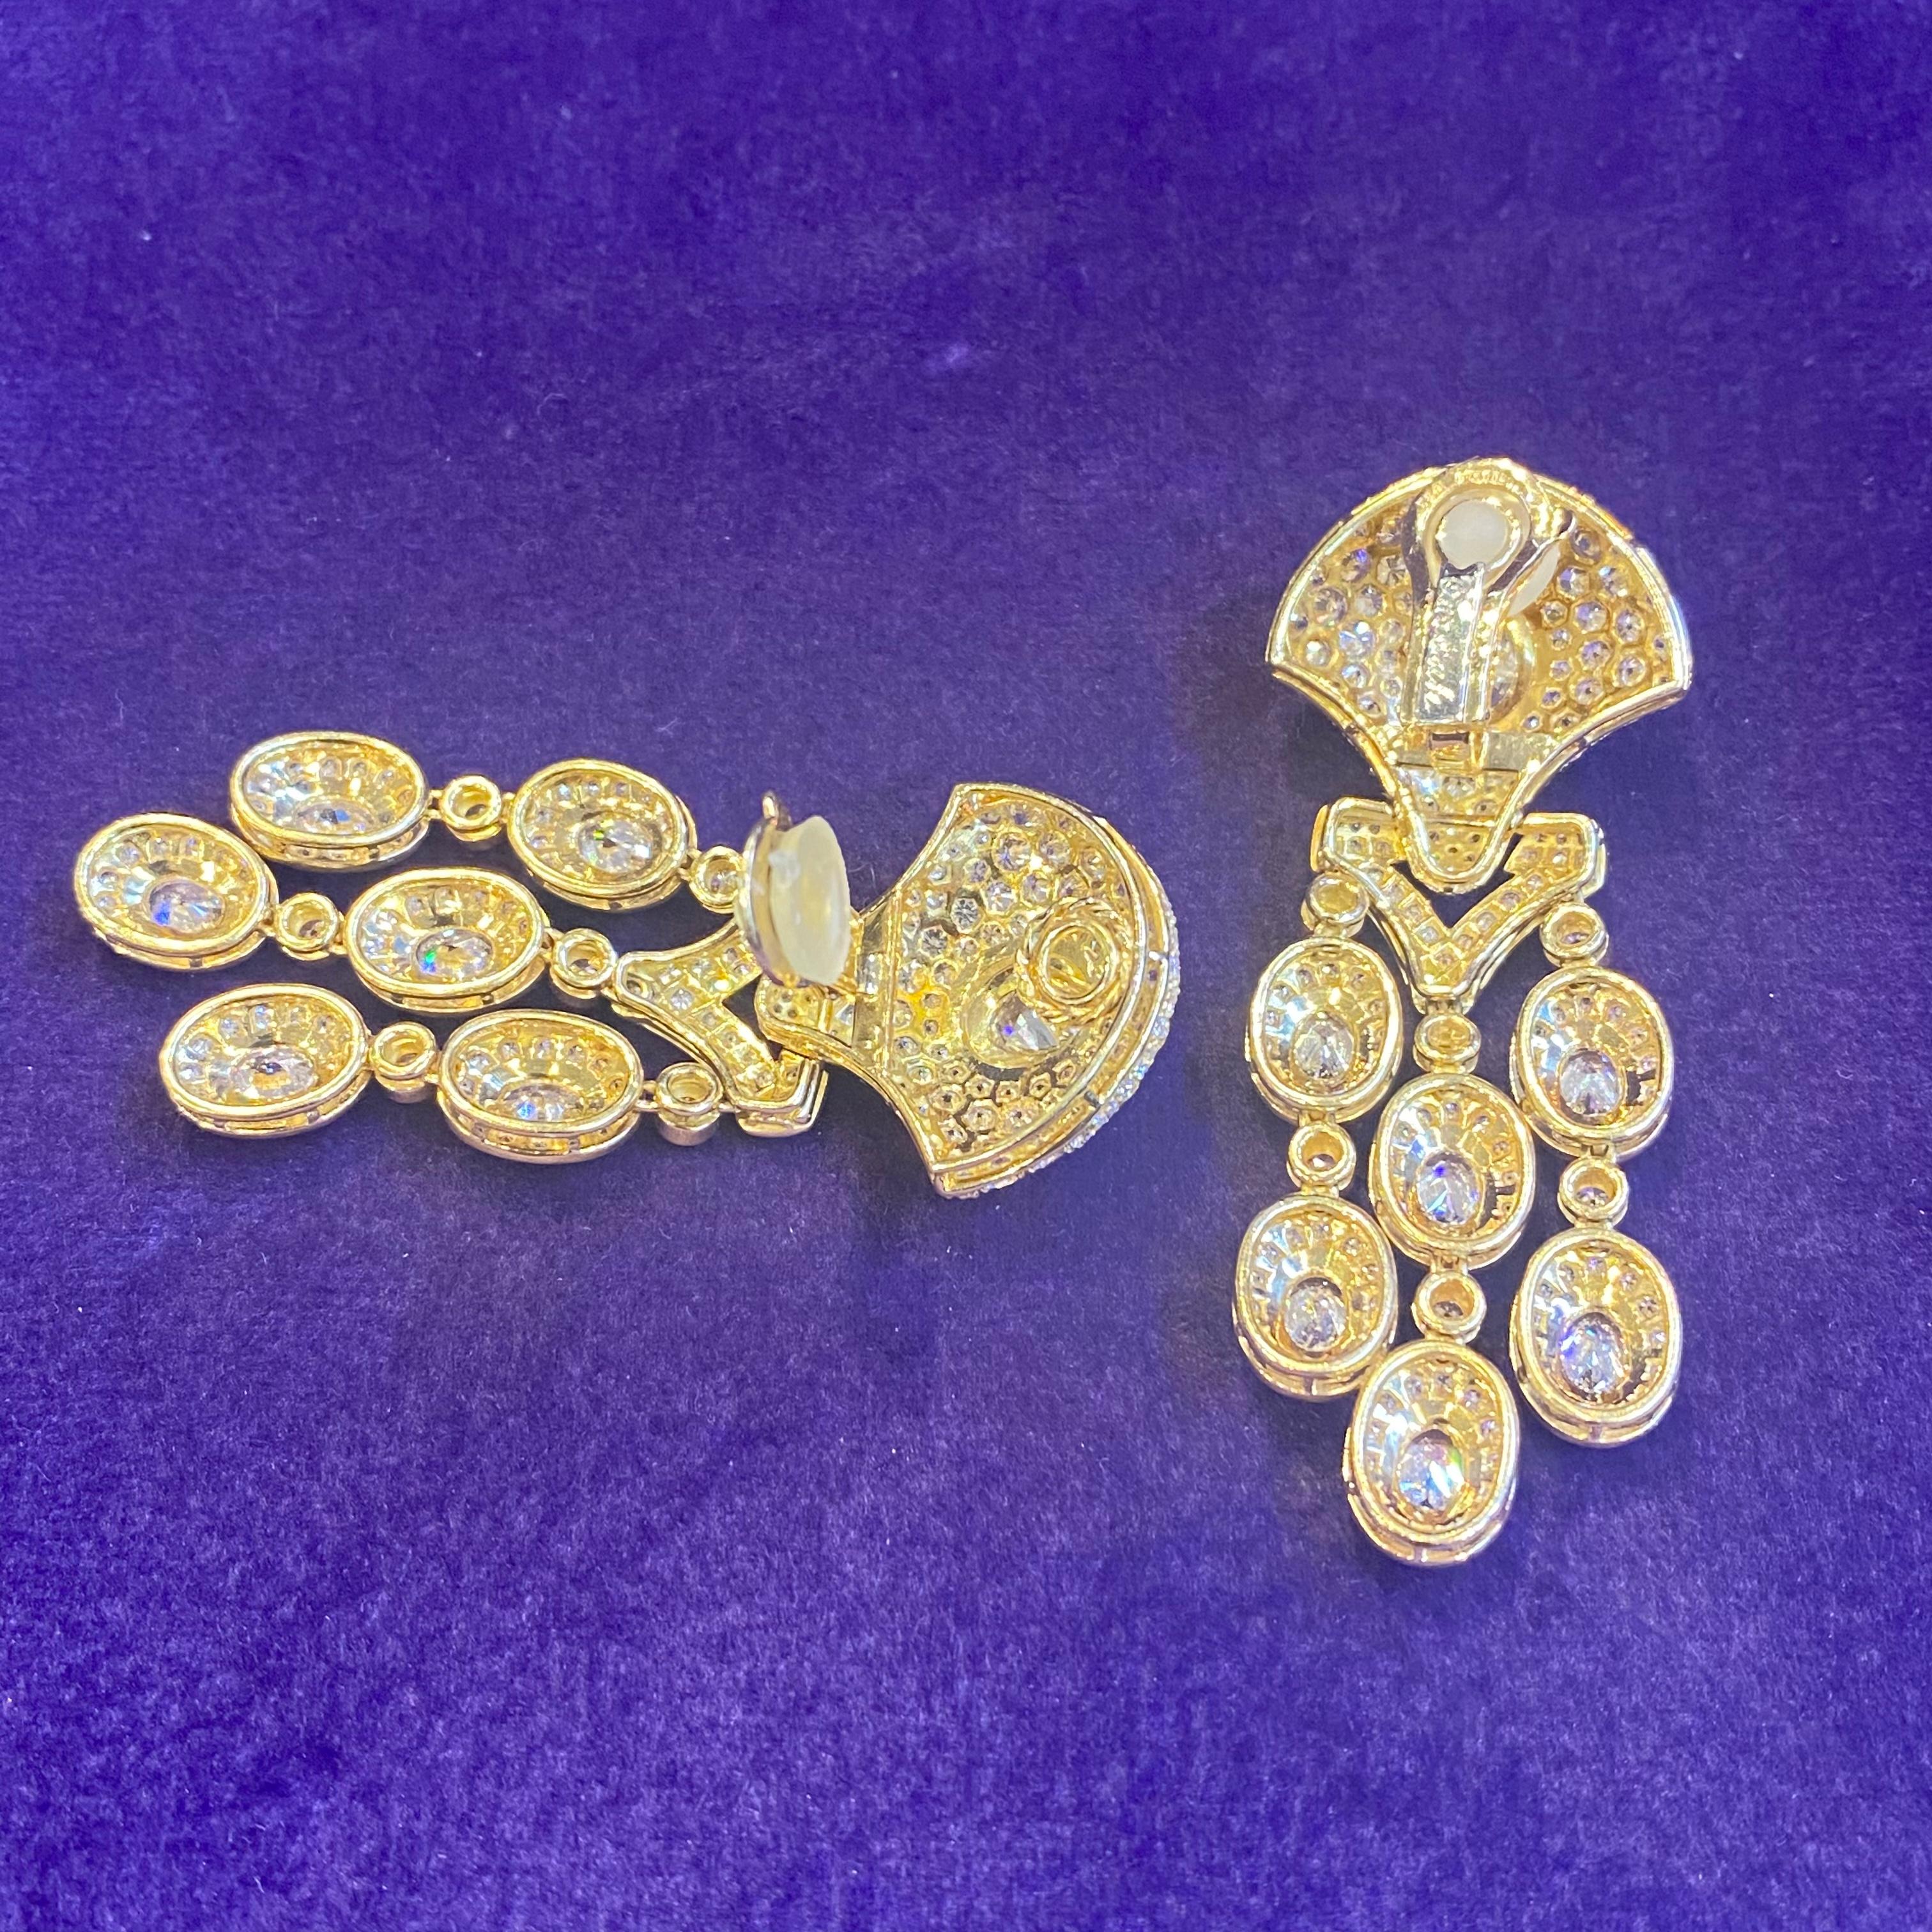 Chandelier Diamond Earrings by Tabbah In Excellent Condition For Sale In New York, NY